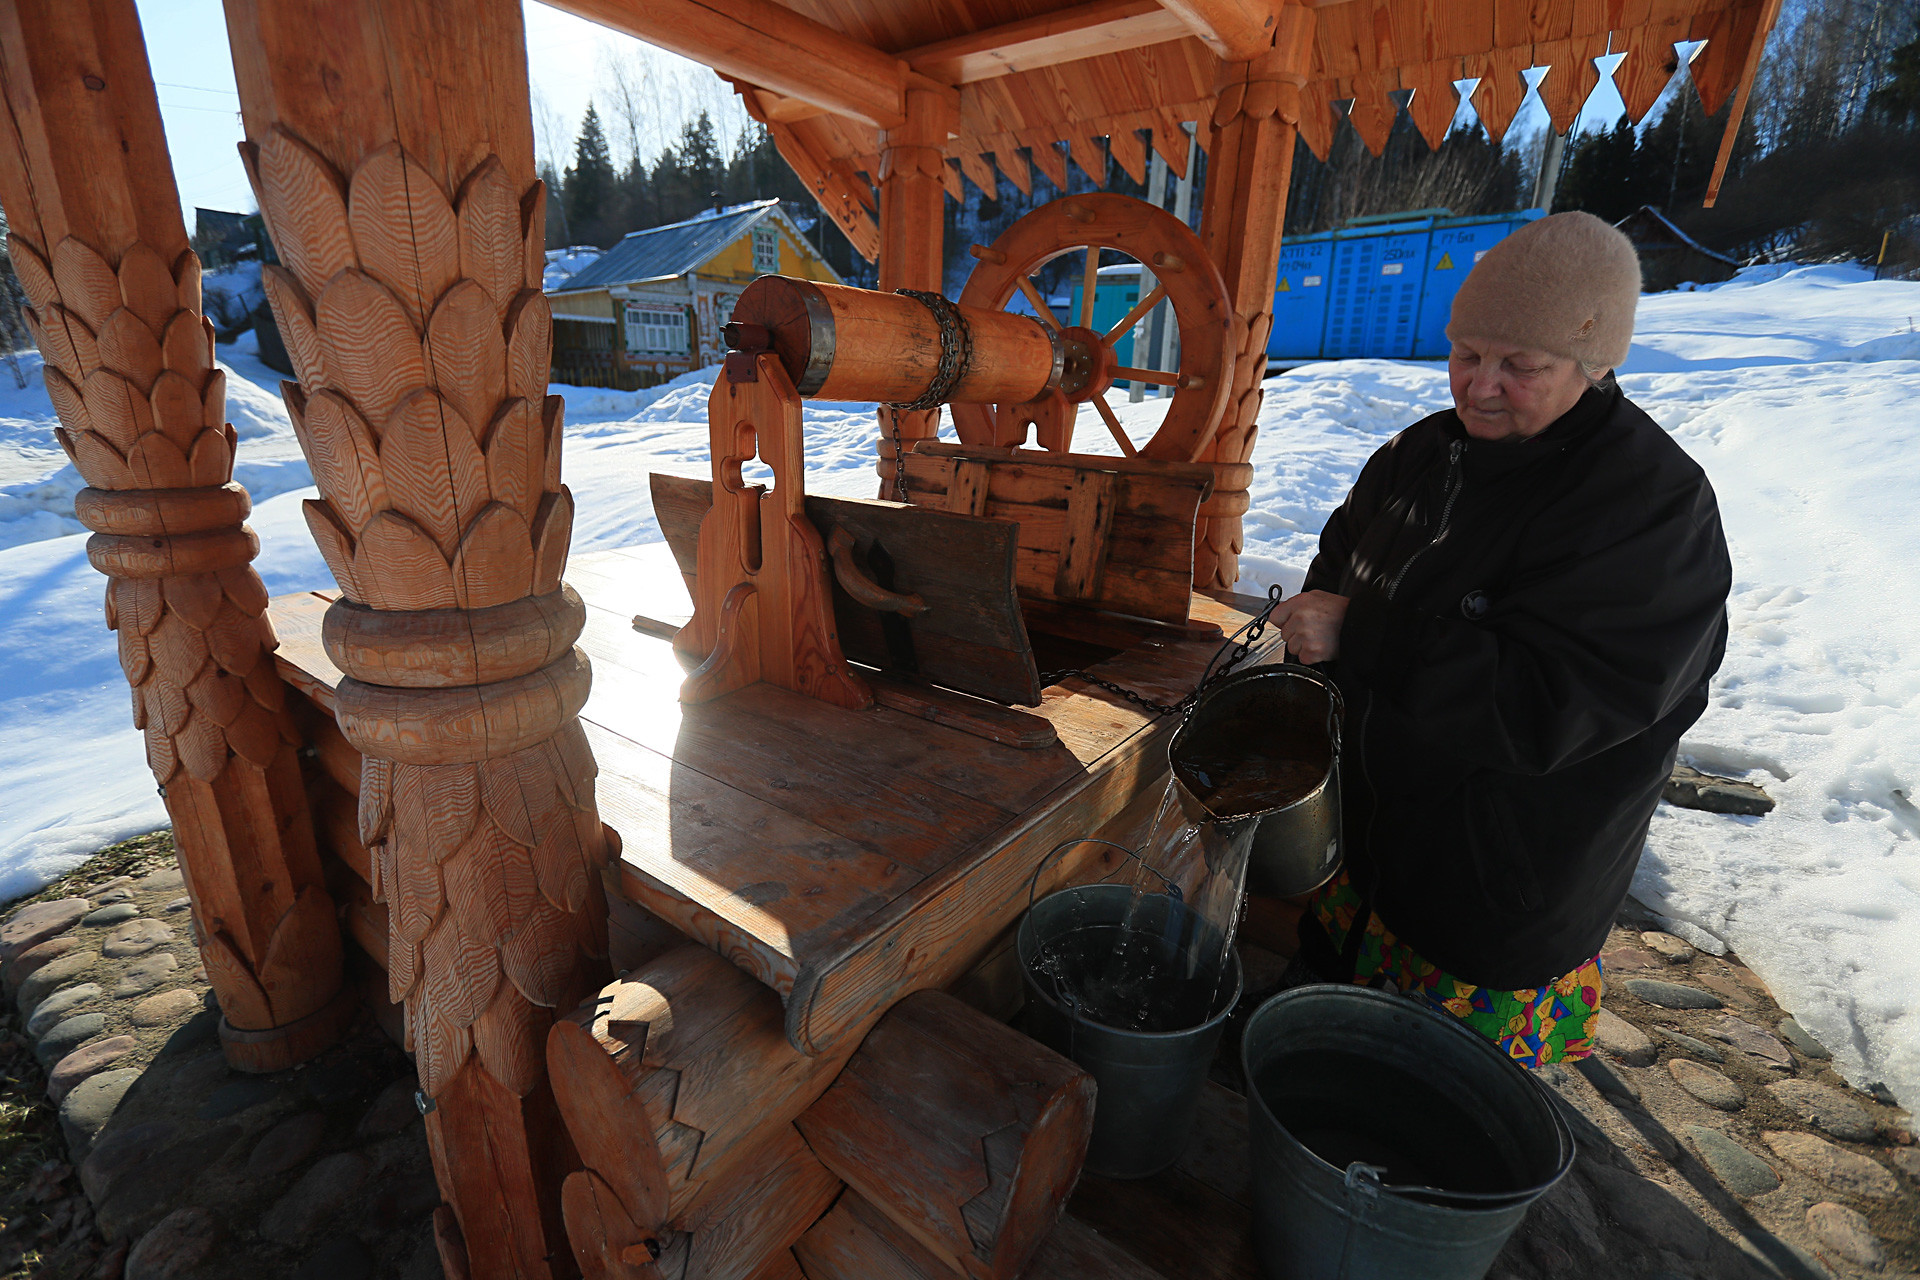 A woman takes water out of a well in the town of Plyos, Ivanovo Region.